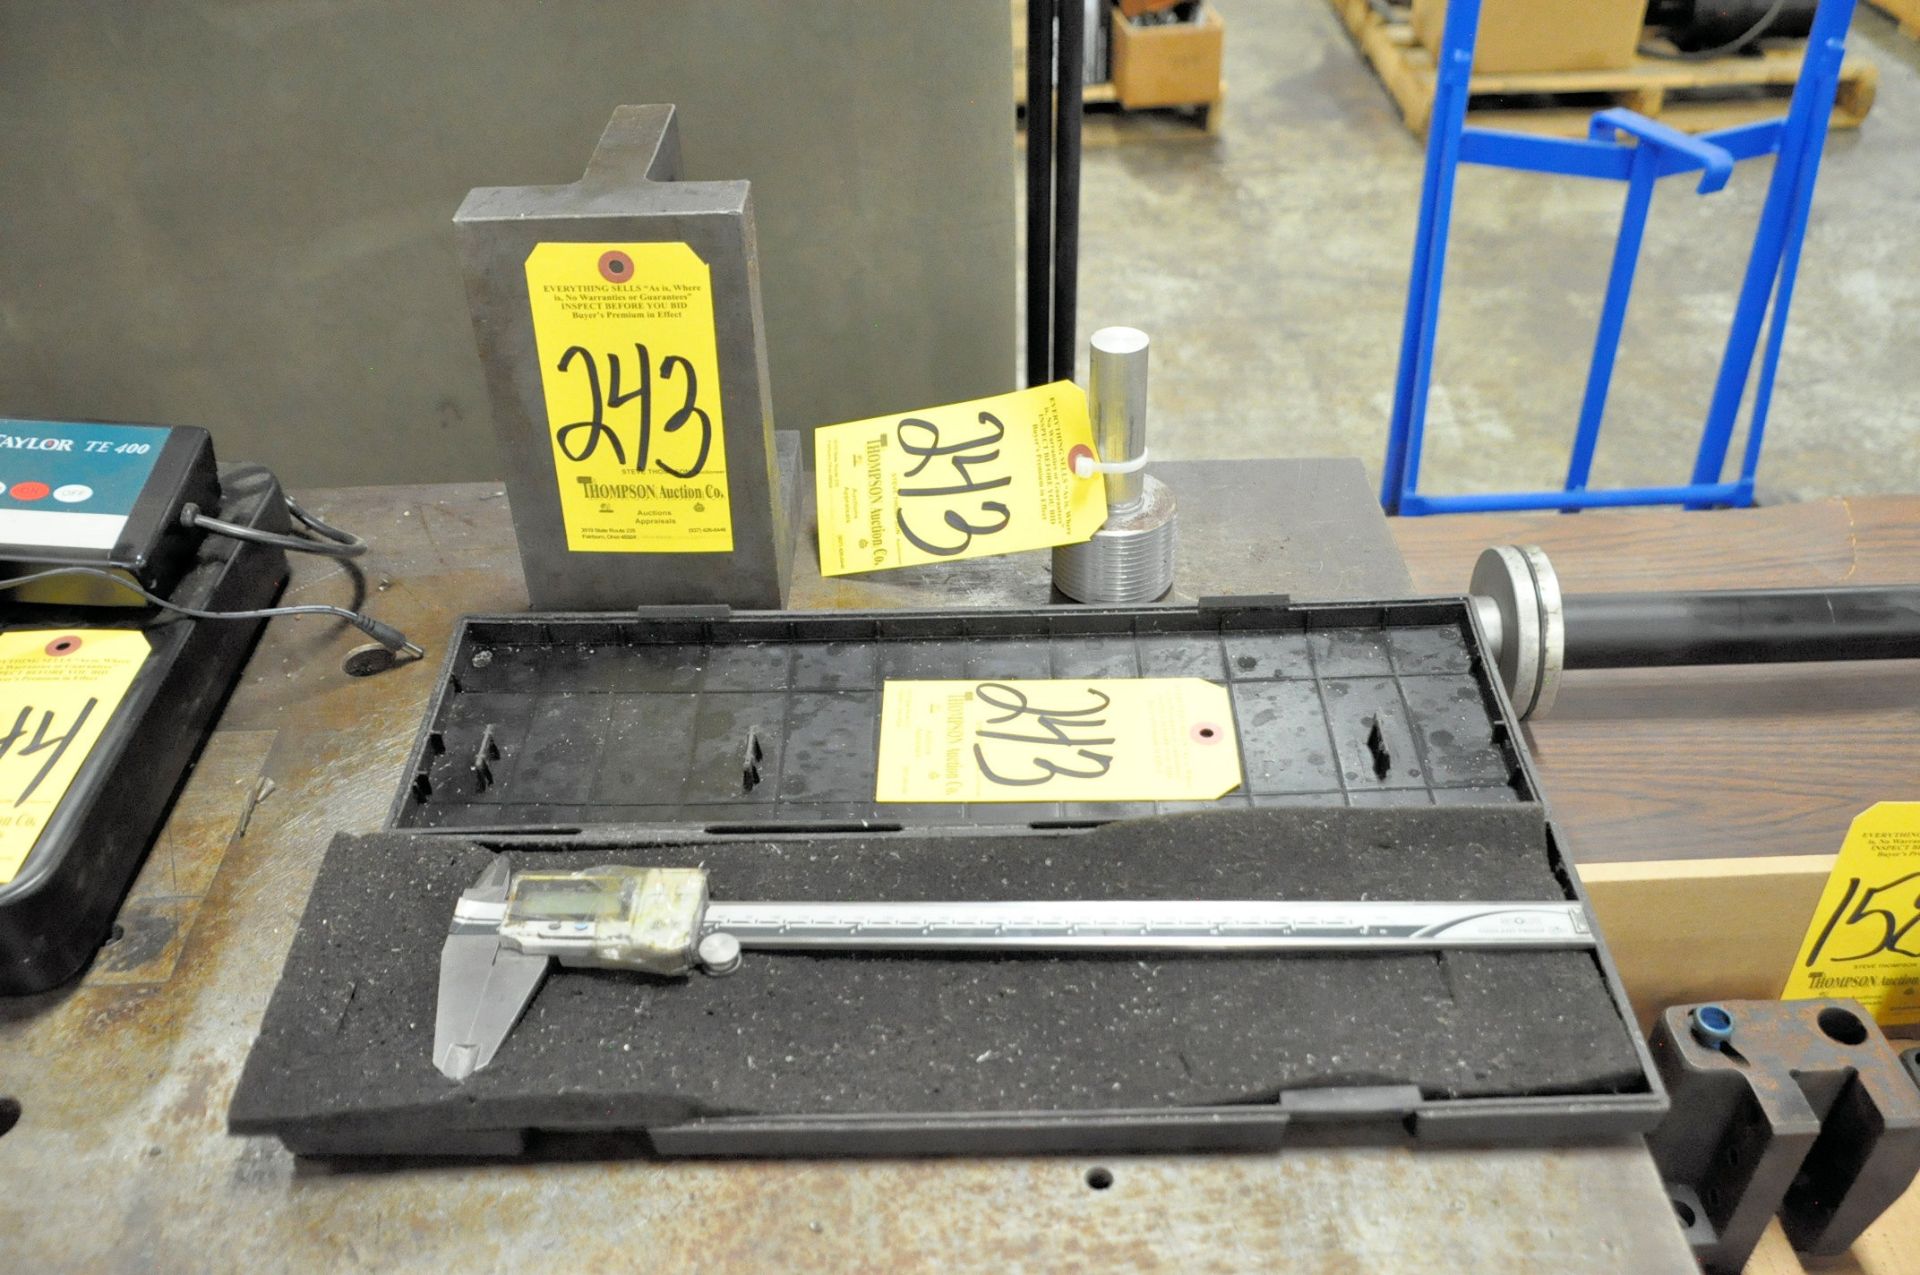 Lot-(1) Mitutoyo Absolute 12" Digital Caliper with Case, (1) Thread Gage and (1) 4 1/2" x 8" x 5"